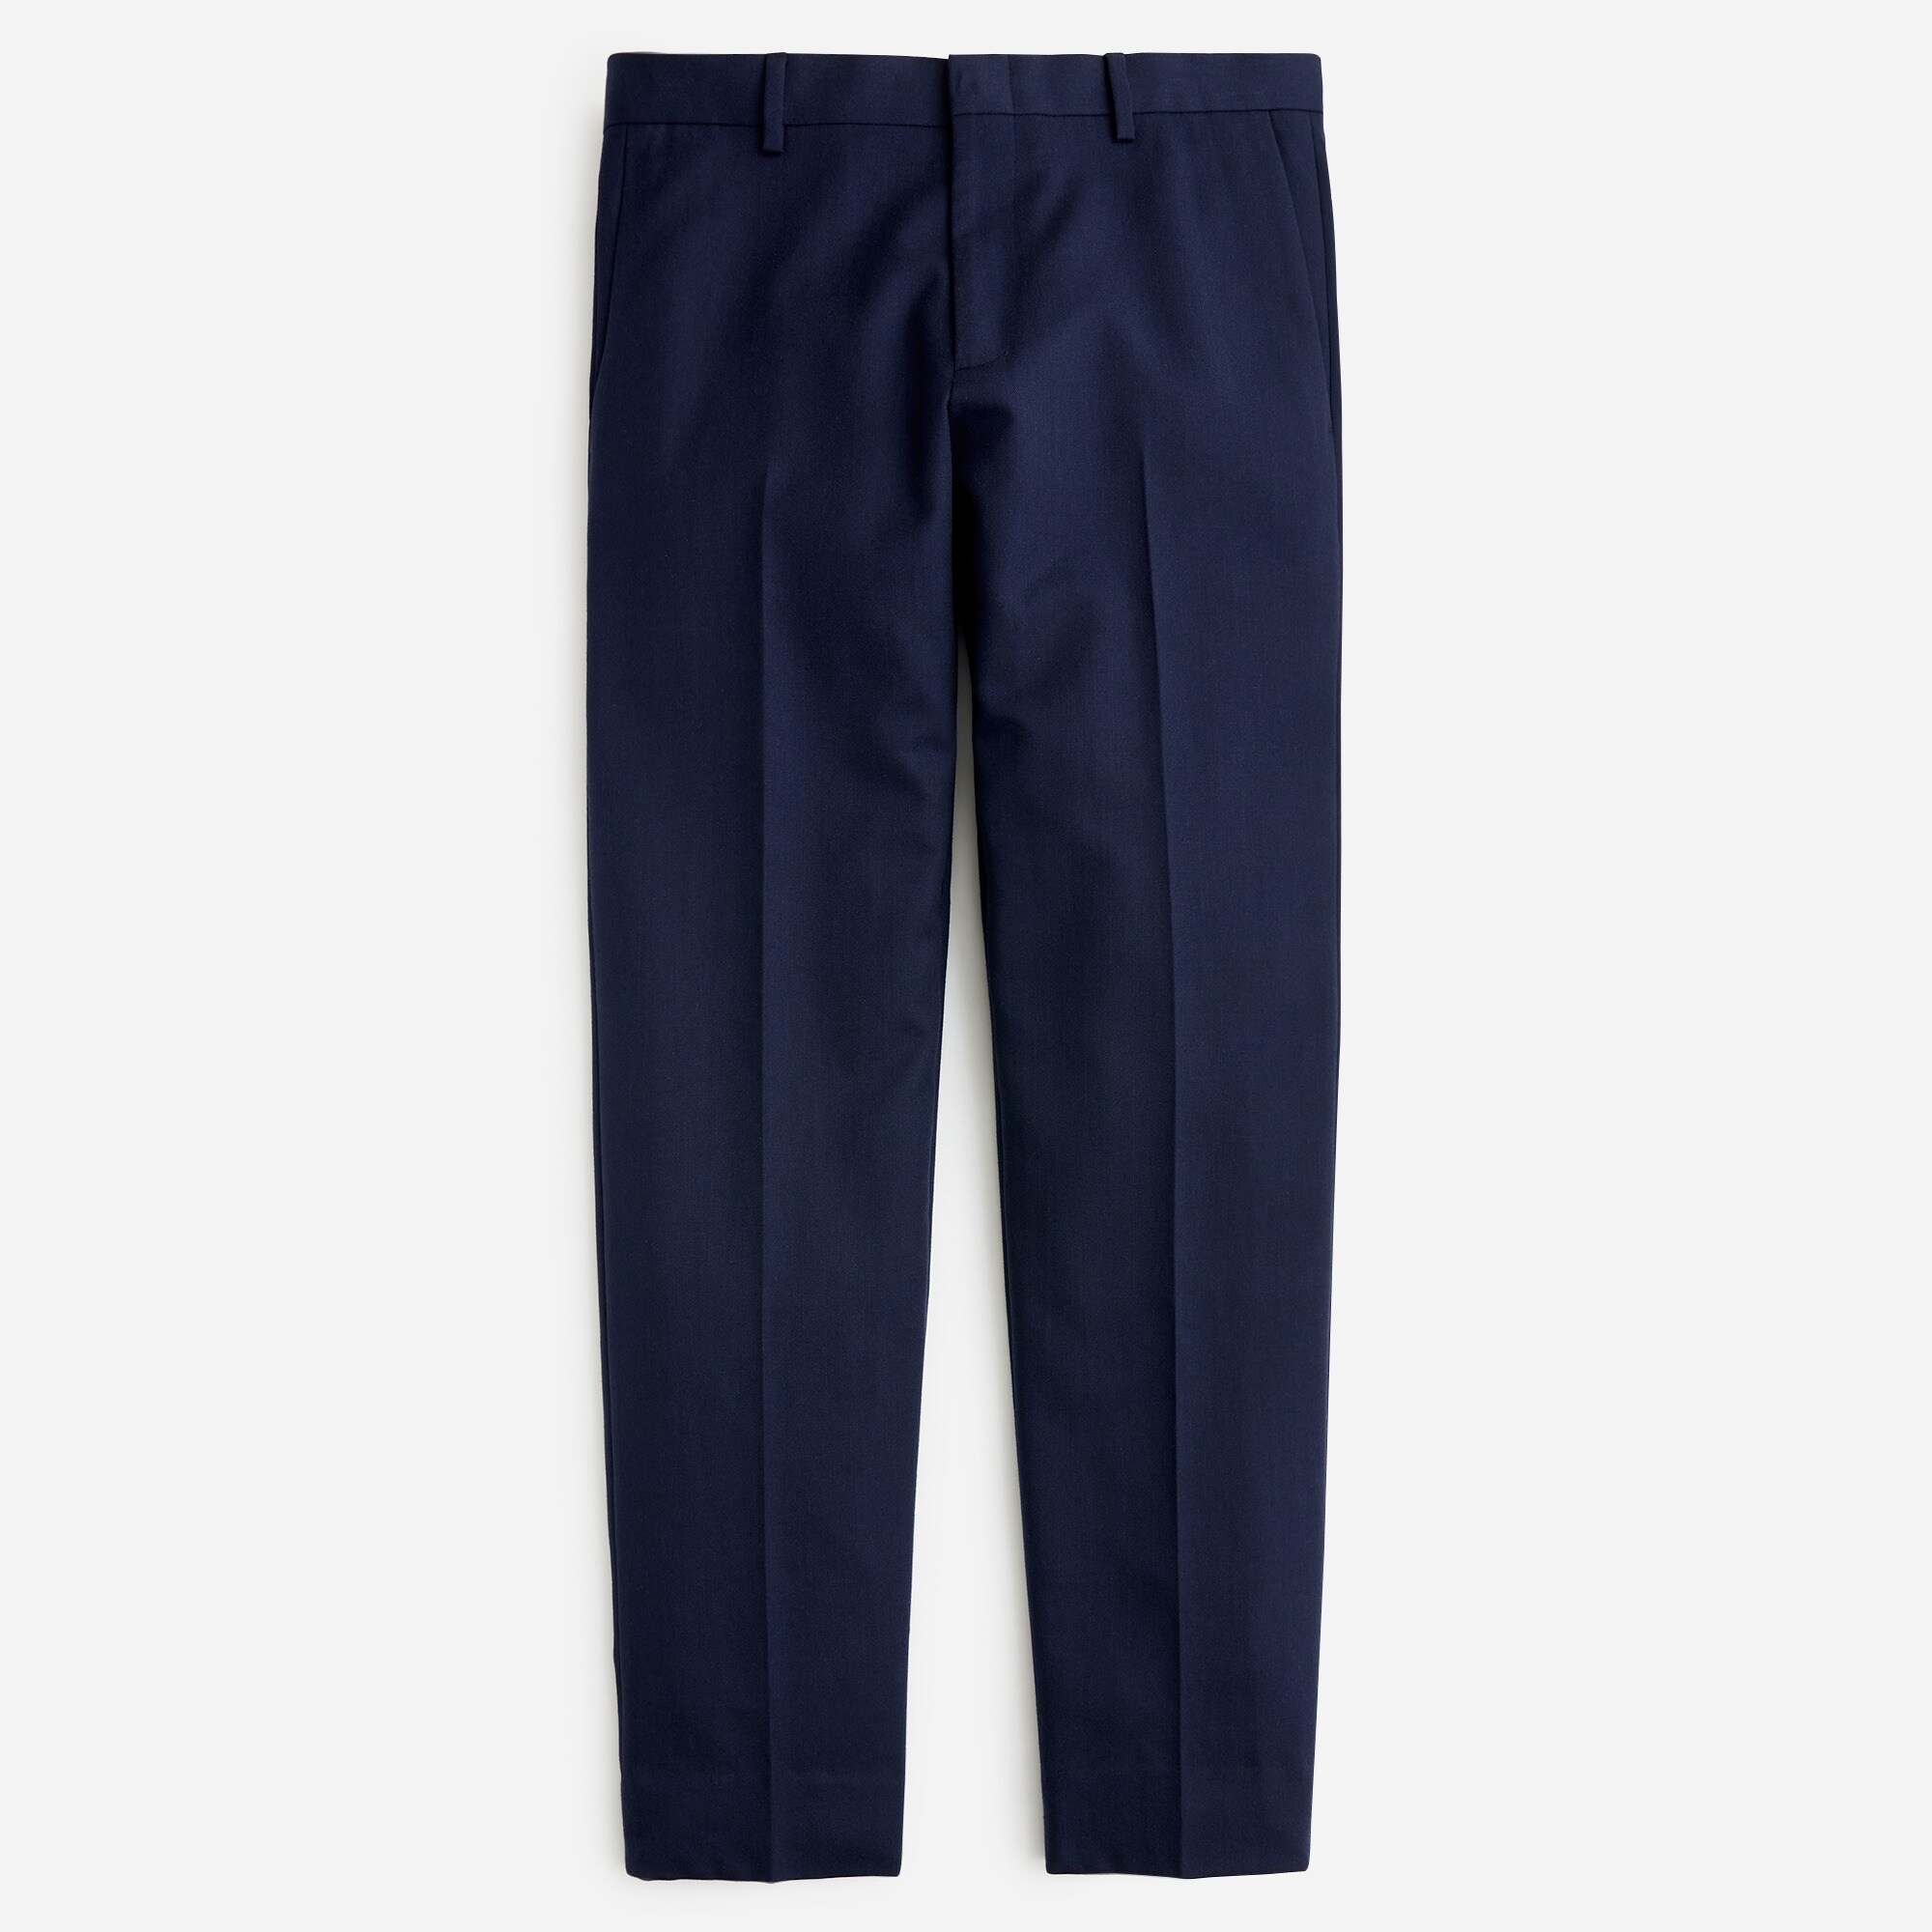  Ludlow Slim-fit unstructured suit pant in English cotton-wool blend  twill